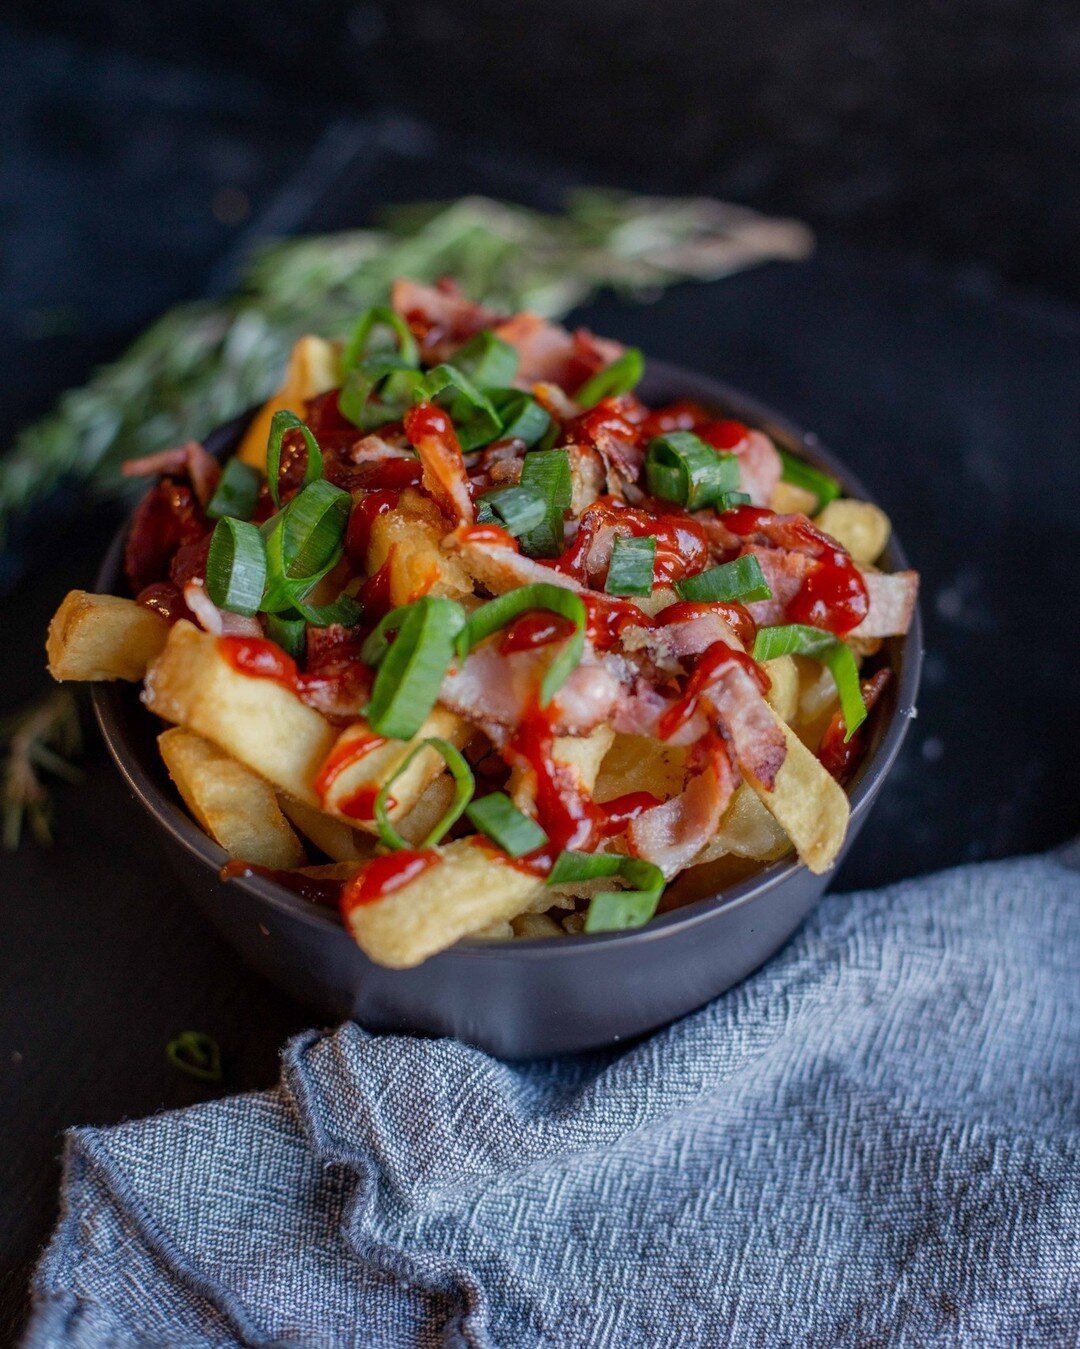 Have you tried our loaded fries? 
Smoked bacon bits, melted cheese, spring onions and house BBQ sauce served with aioli. Grab a serve with you favourite dish! 
#cheatday #themeatpreachers #queenstowneats #fries #loadedfries